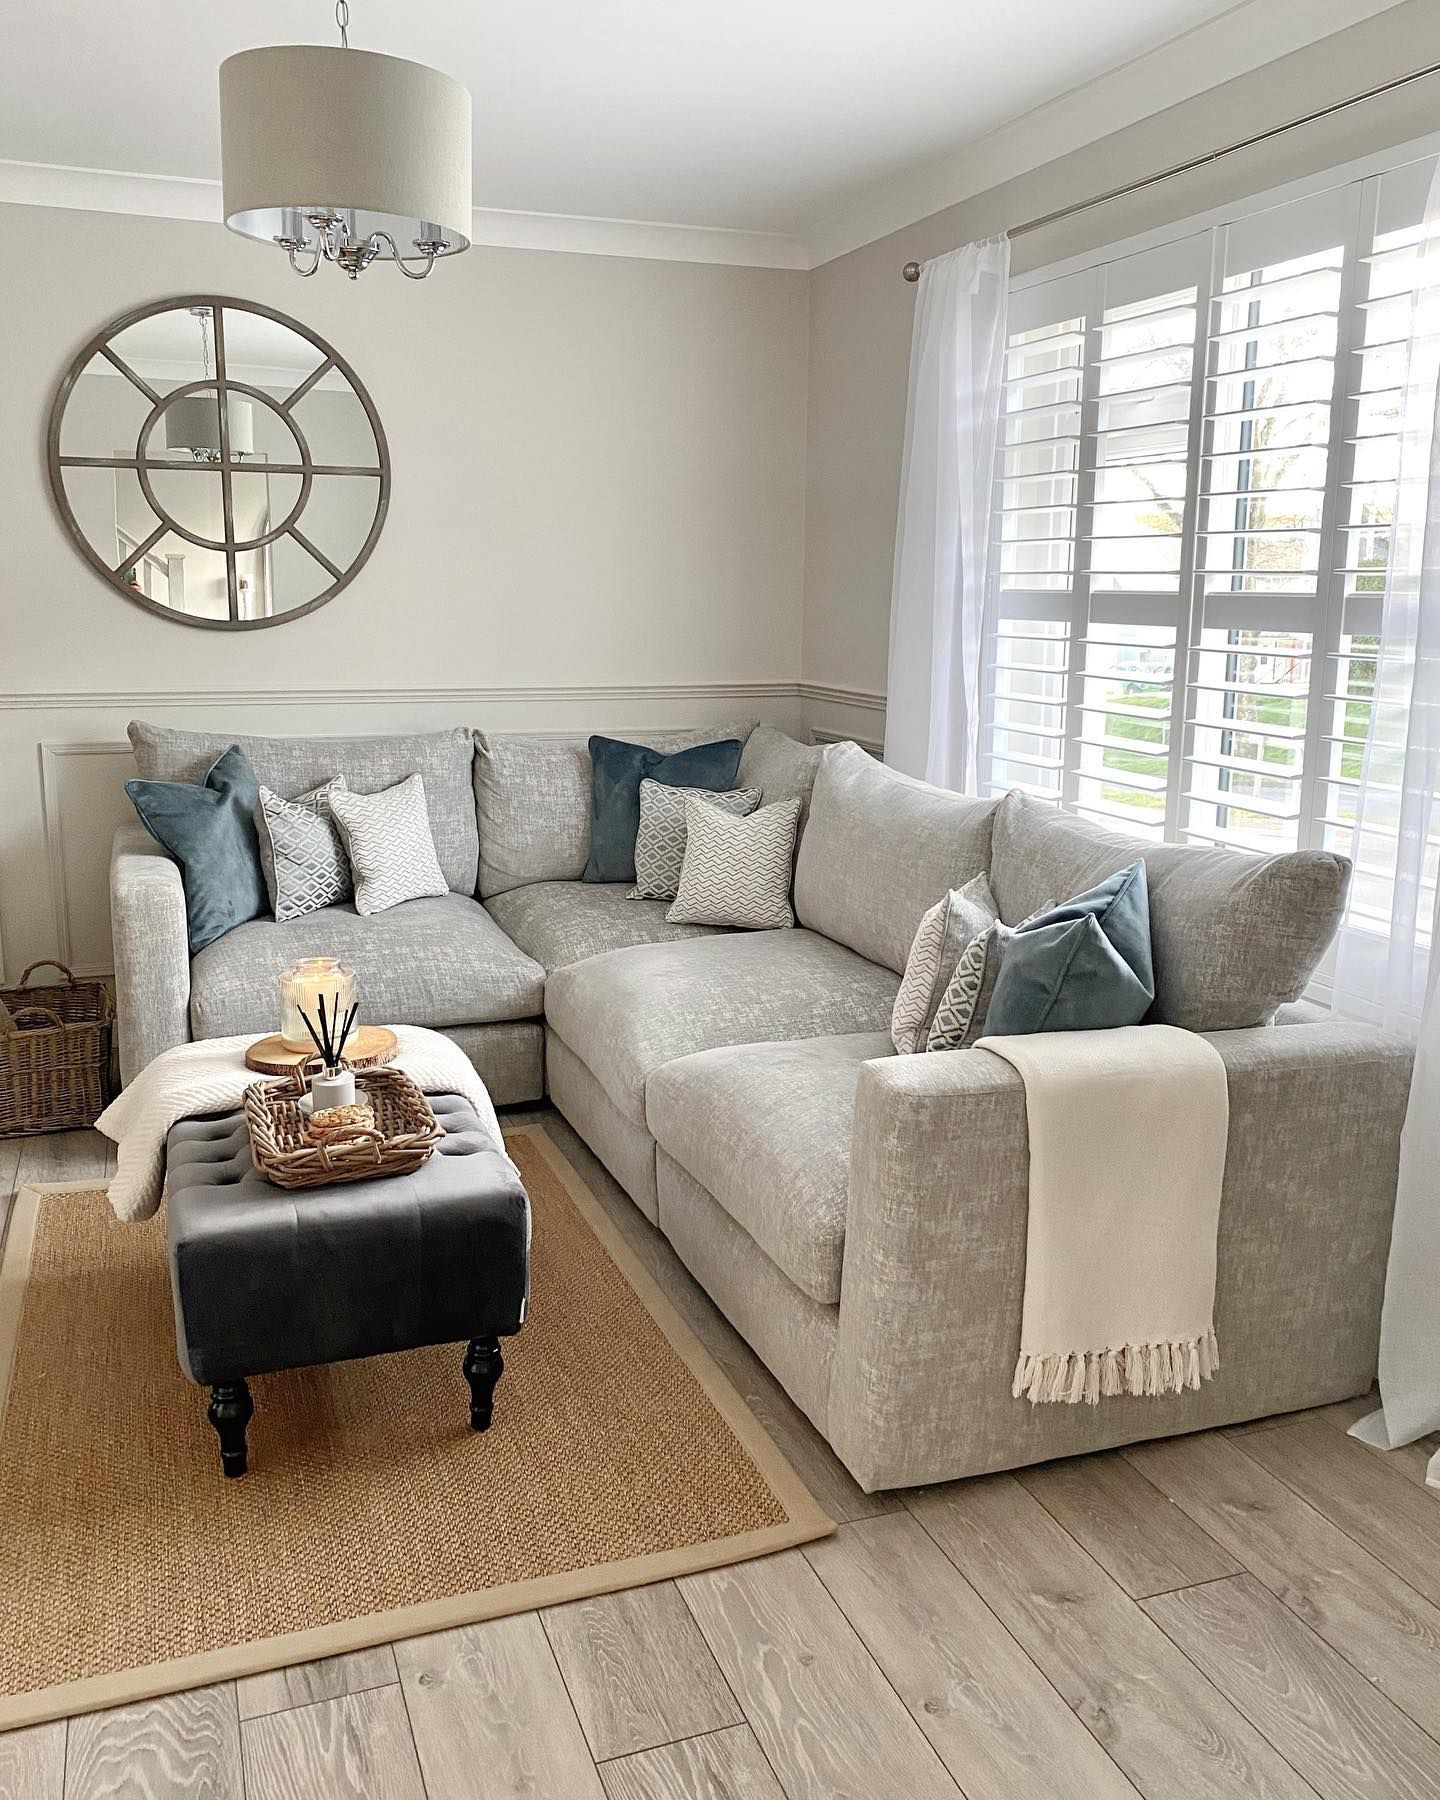 Choosing The Right Sofa For Your Home | The Oak Furnitureland Blog Pertaining To Sofas In Cream (View 9 of 15)